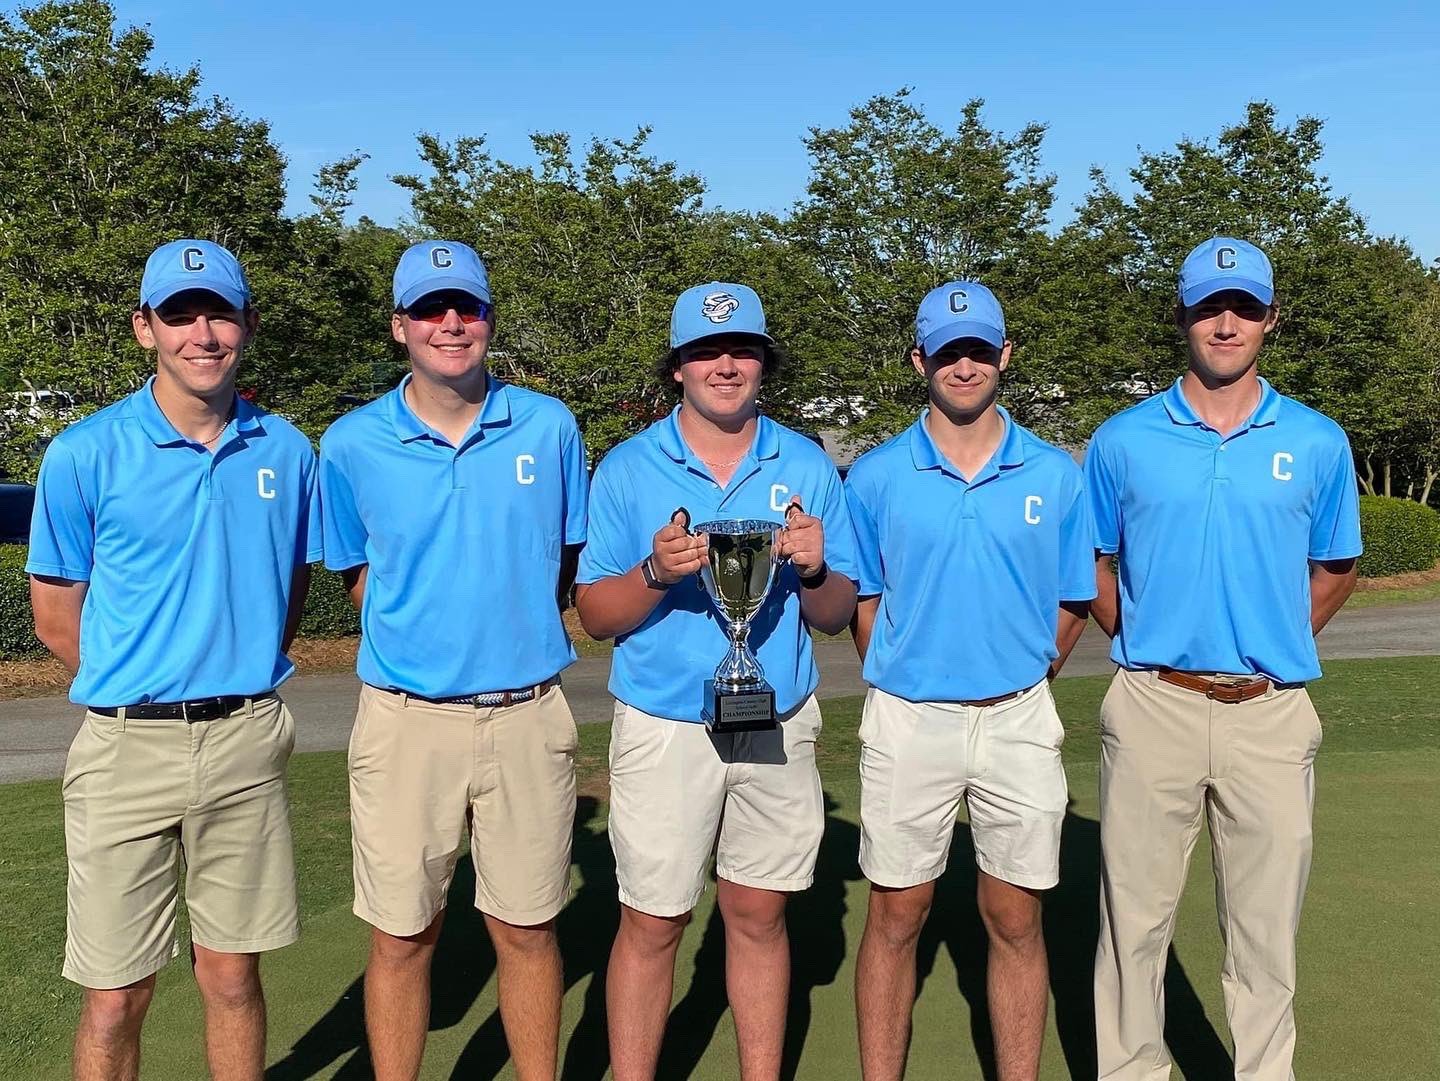 The Chapin High School boys golf team with the inaugural Lexington County Invitational trophy.